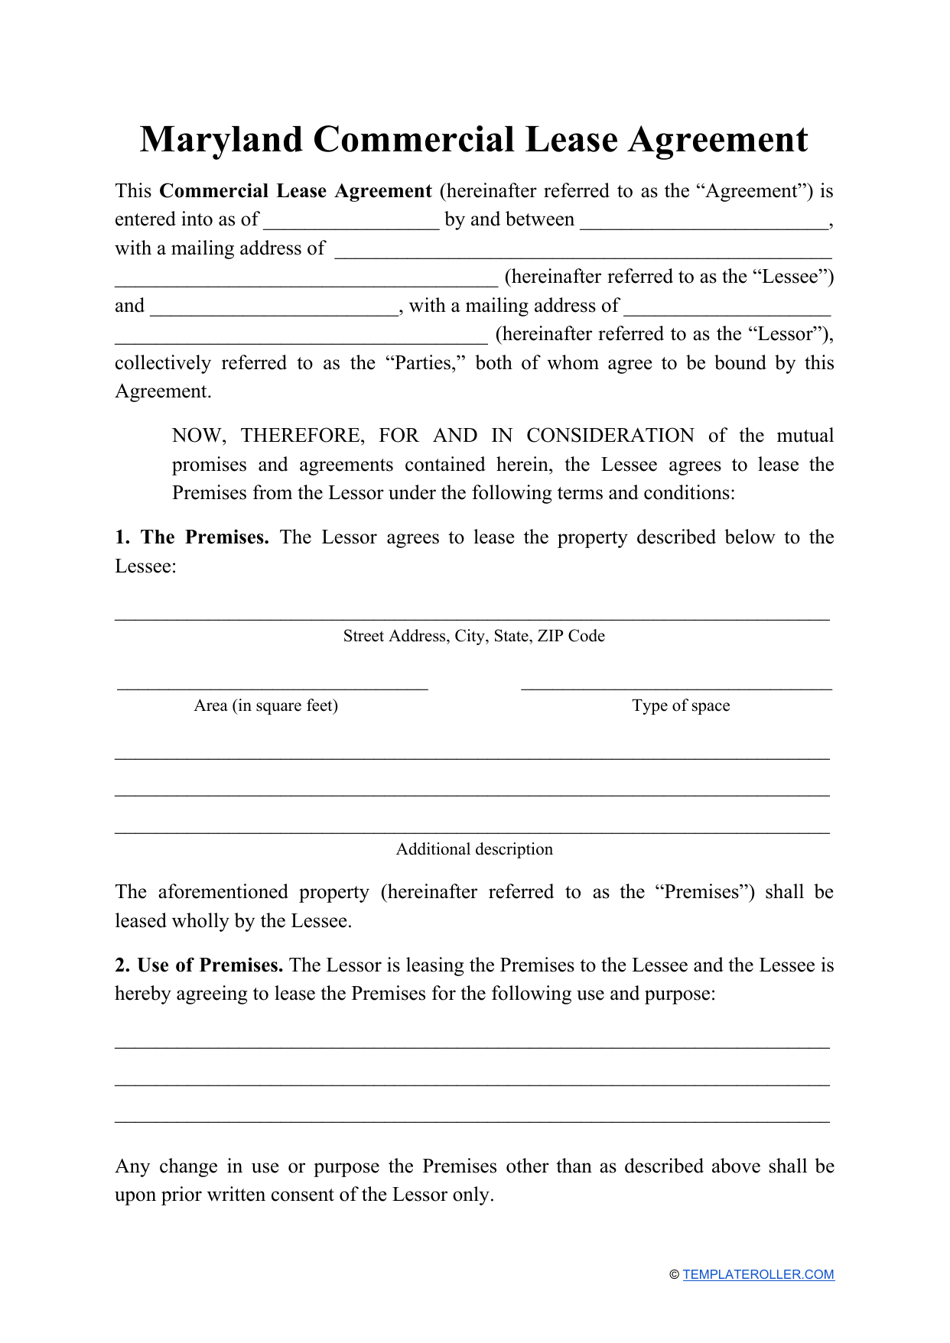 Commercial Lease Agreement Template - Maryland, Page 1